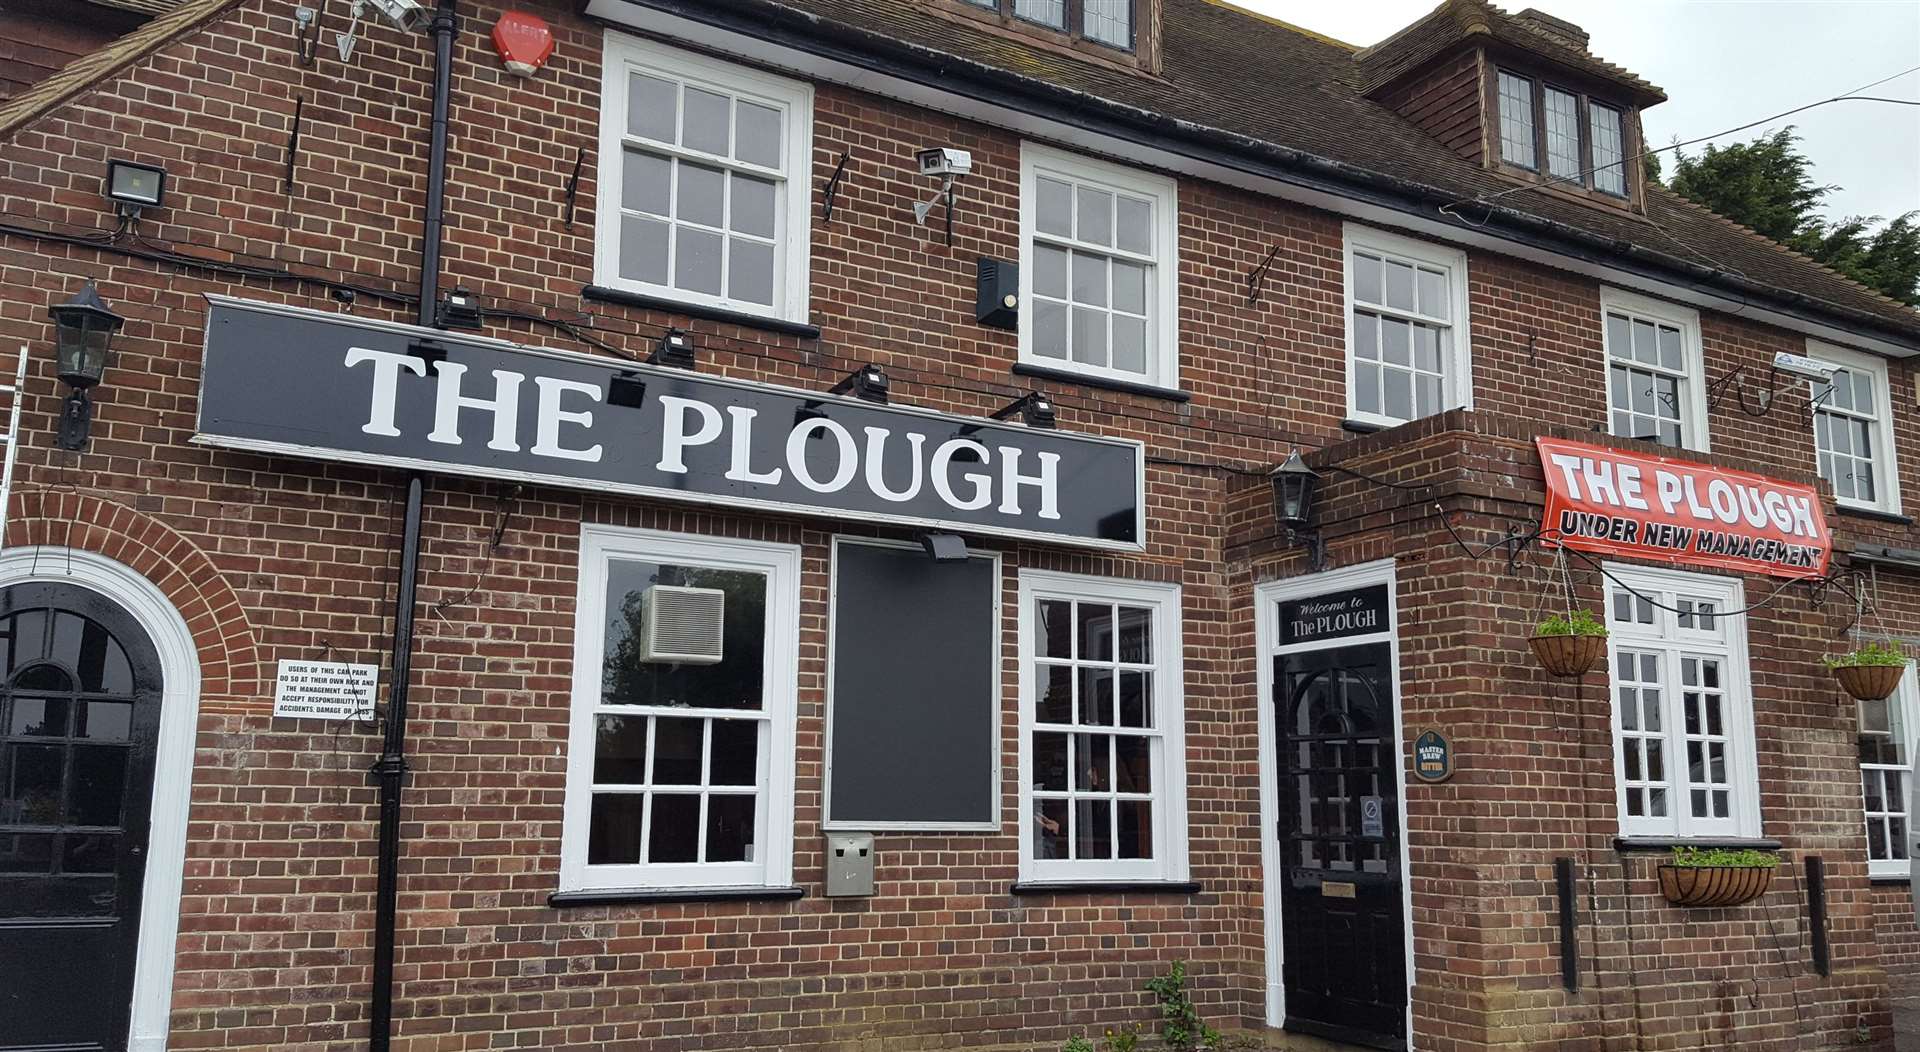 The pub has been closed for nine months